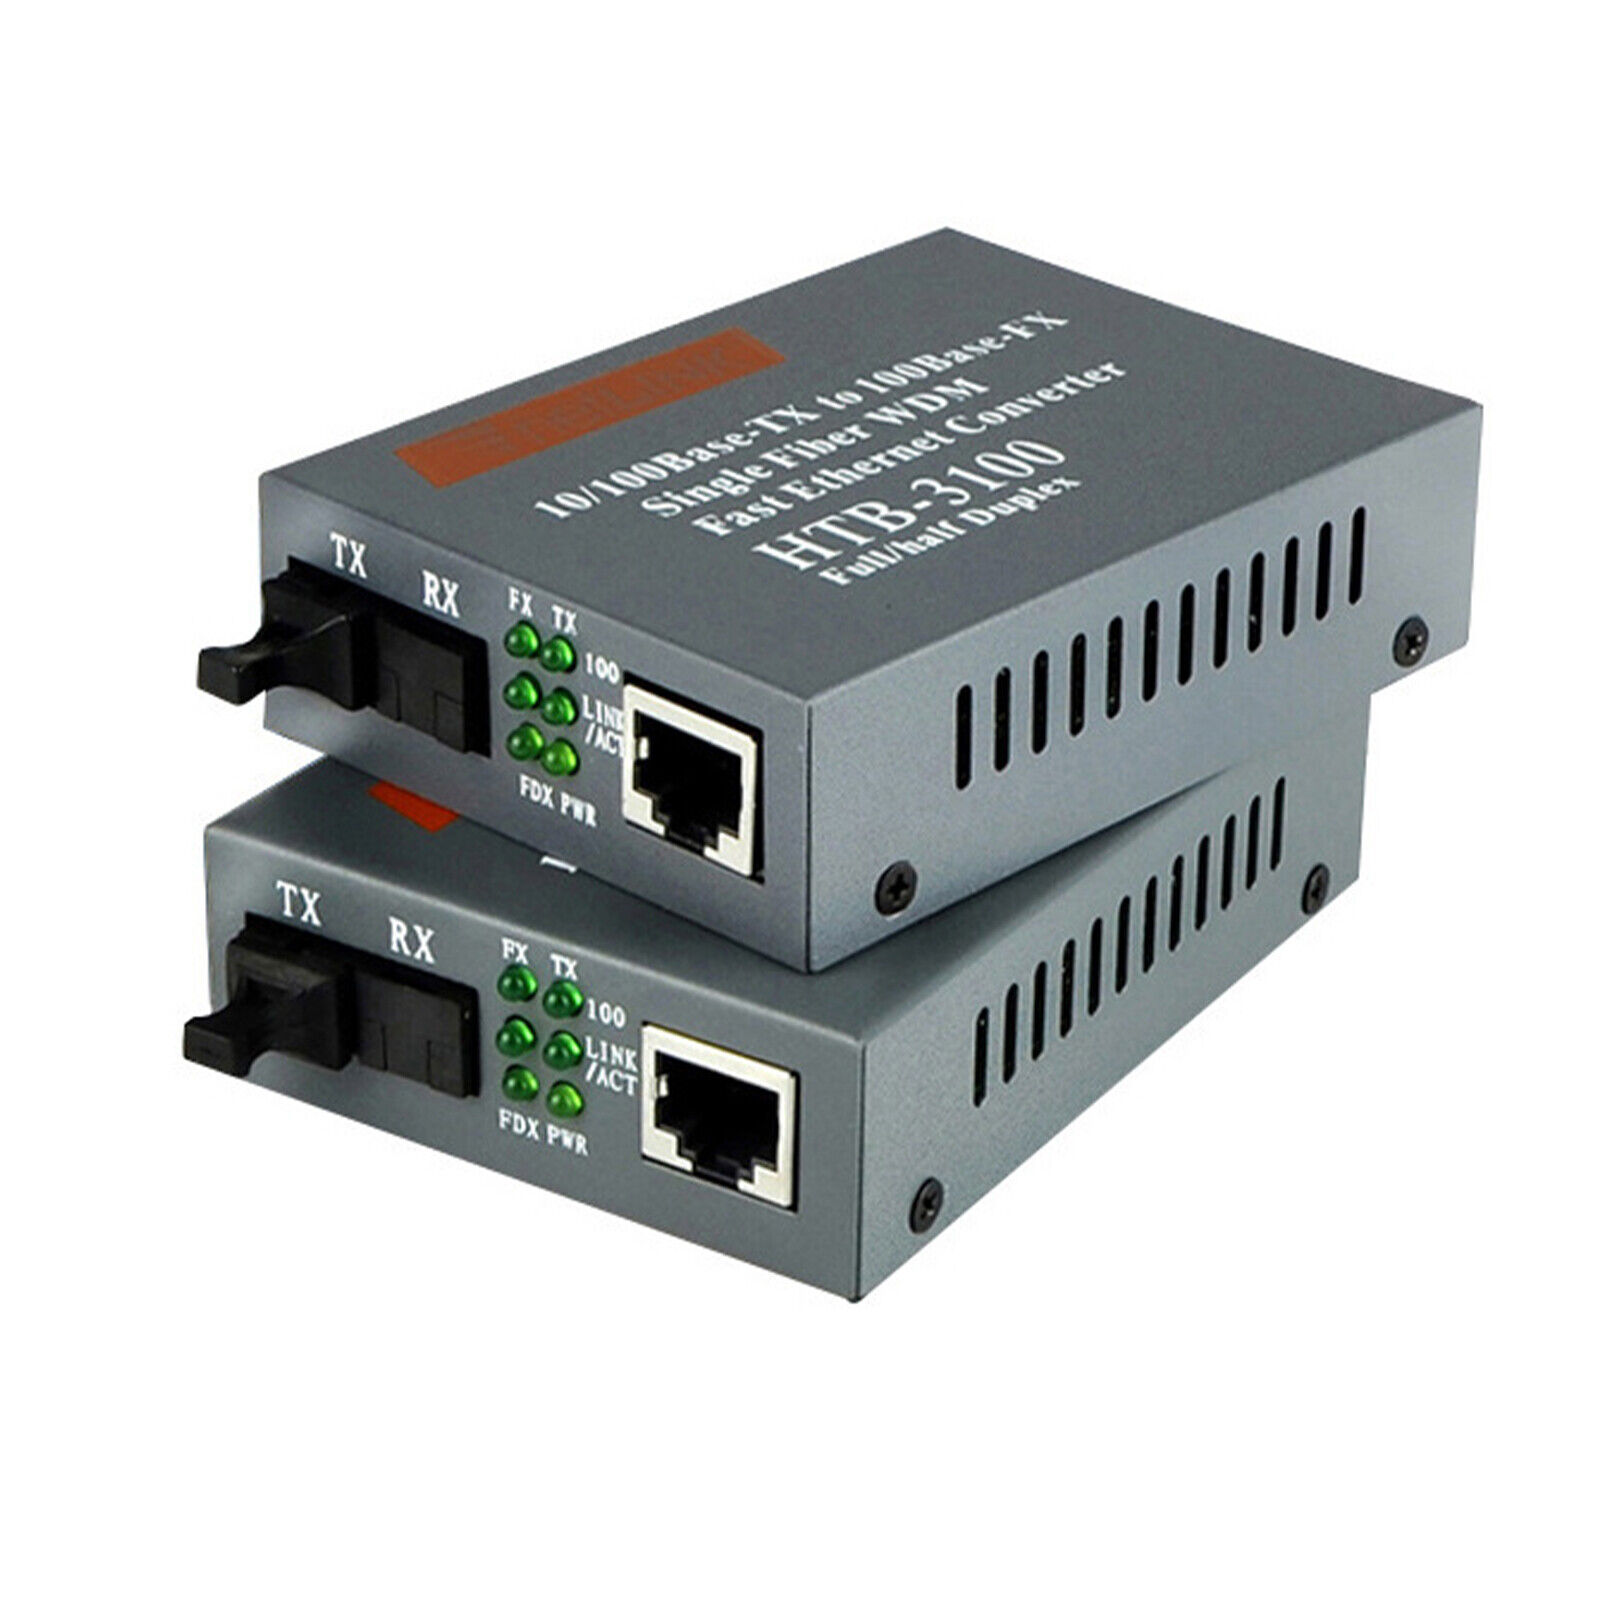 Top Fiber Ethernet Media Converters Suppliers & Manufacturers in the World